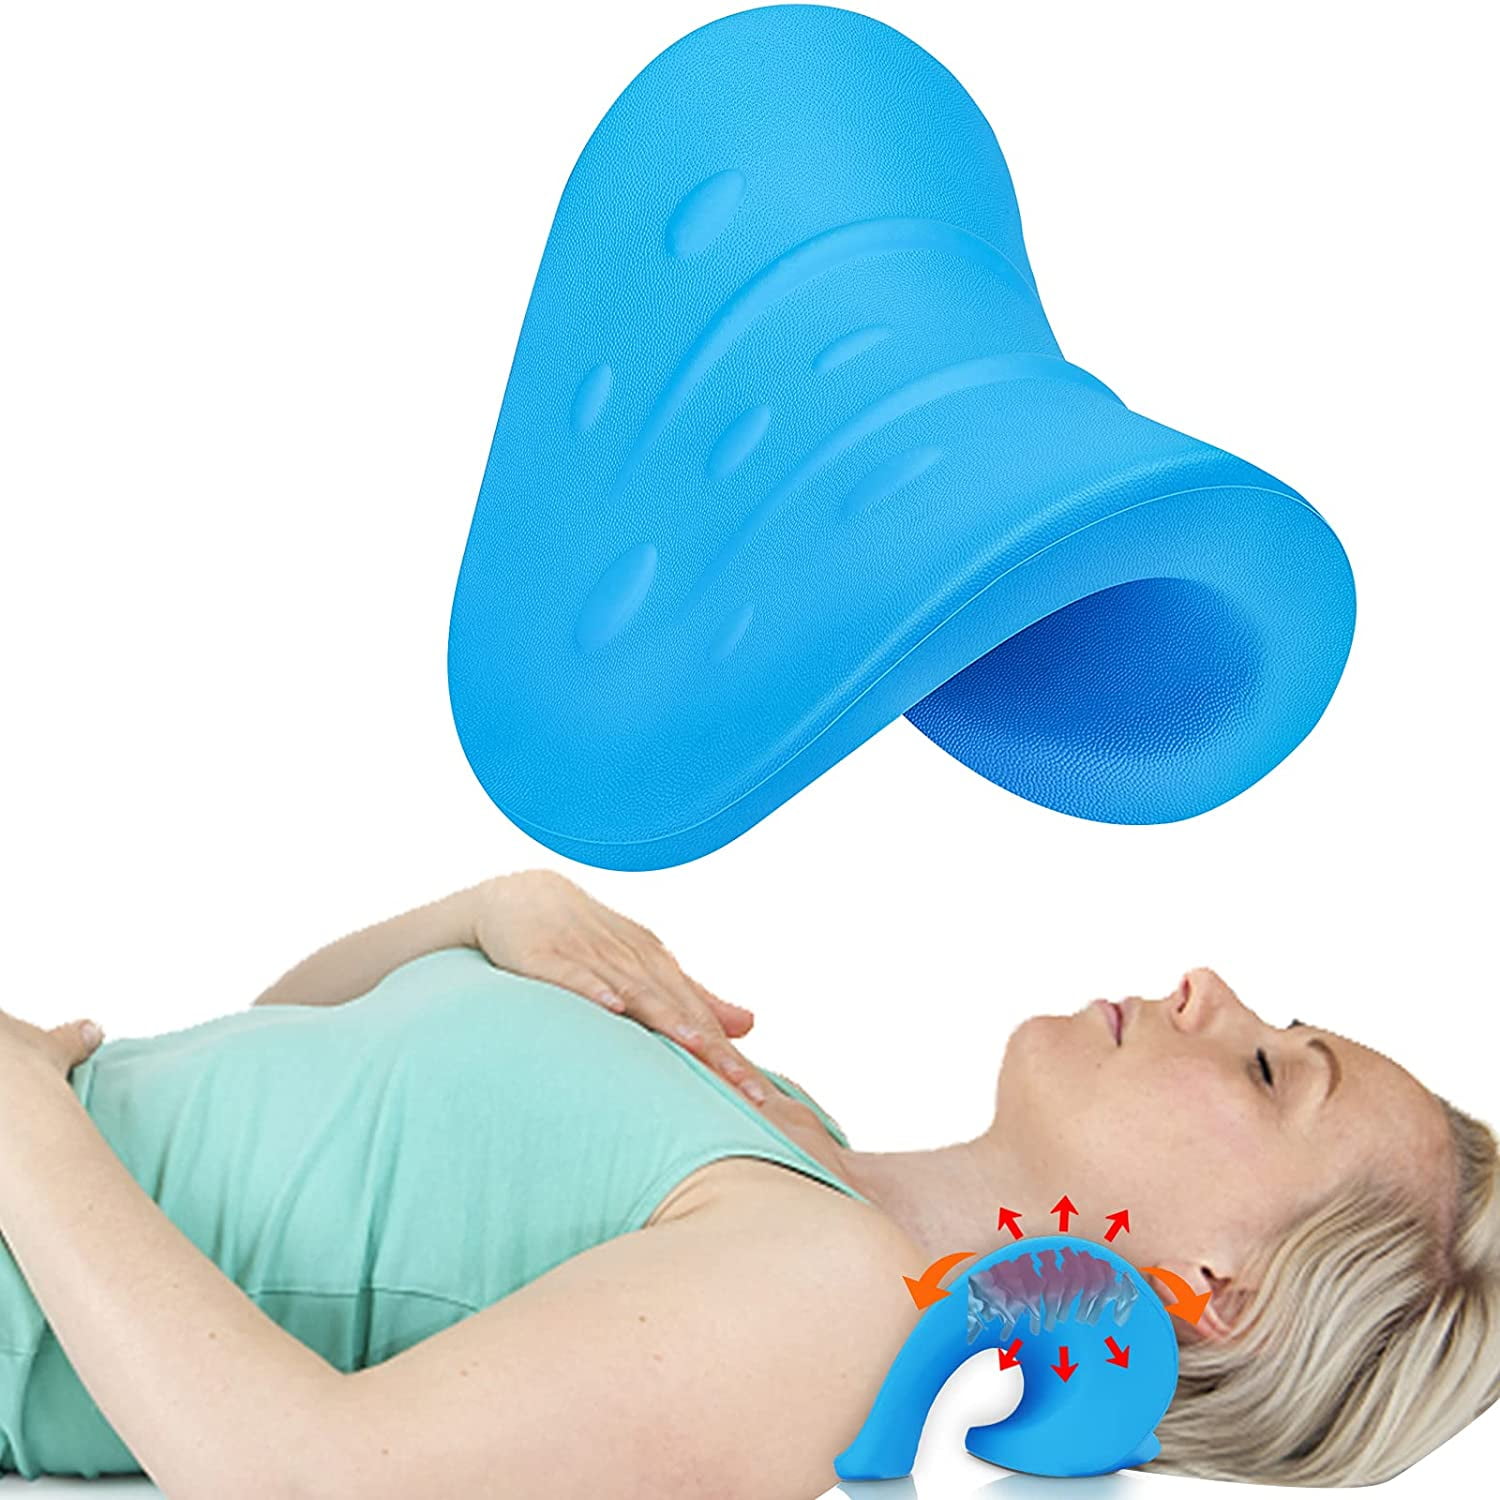 Starynighty Neck Traction Pillow Rest Cloud Cushion Support Neck Nerve Stretcher Pain Relief, Size: One size, Blue